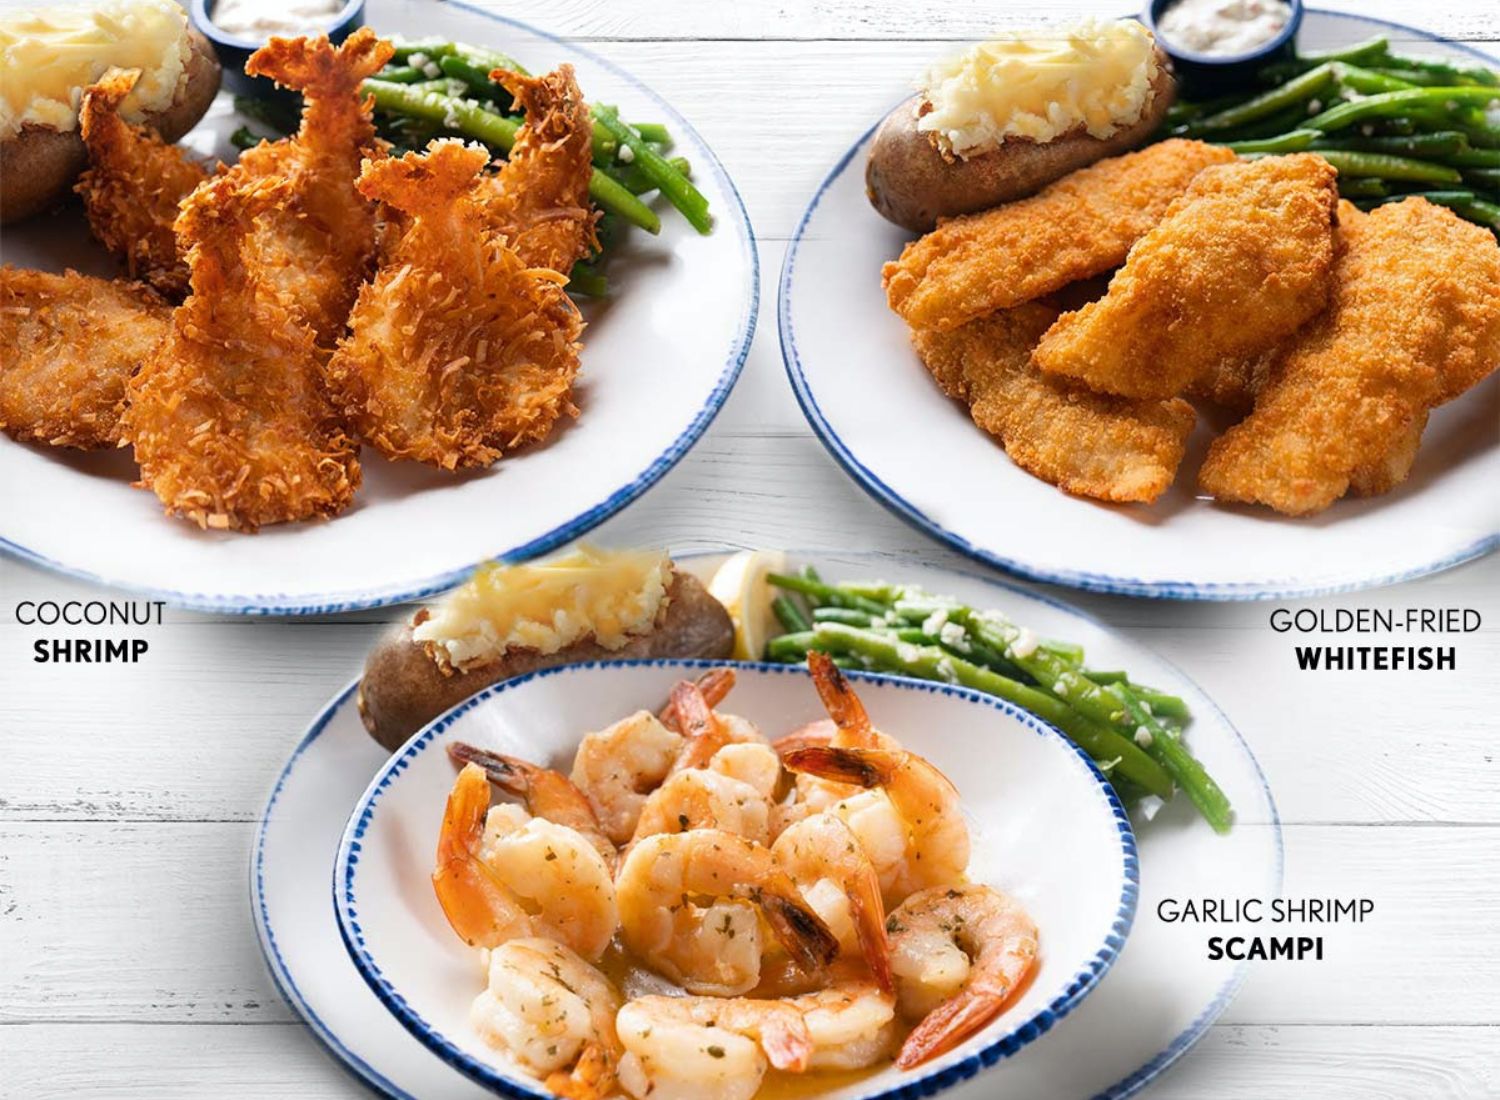 Red Lobster Welcomes the Create Your Own Lunch Deal Starting at $9.99 with Dine In, Delivery or To Go Orders